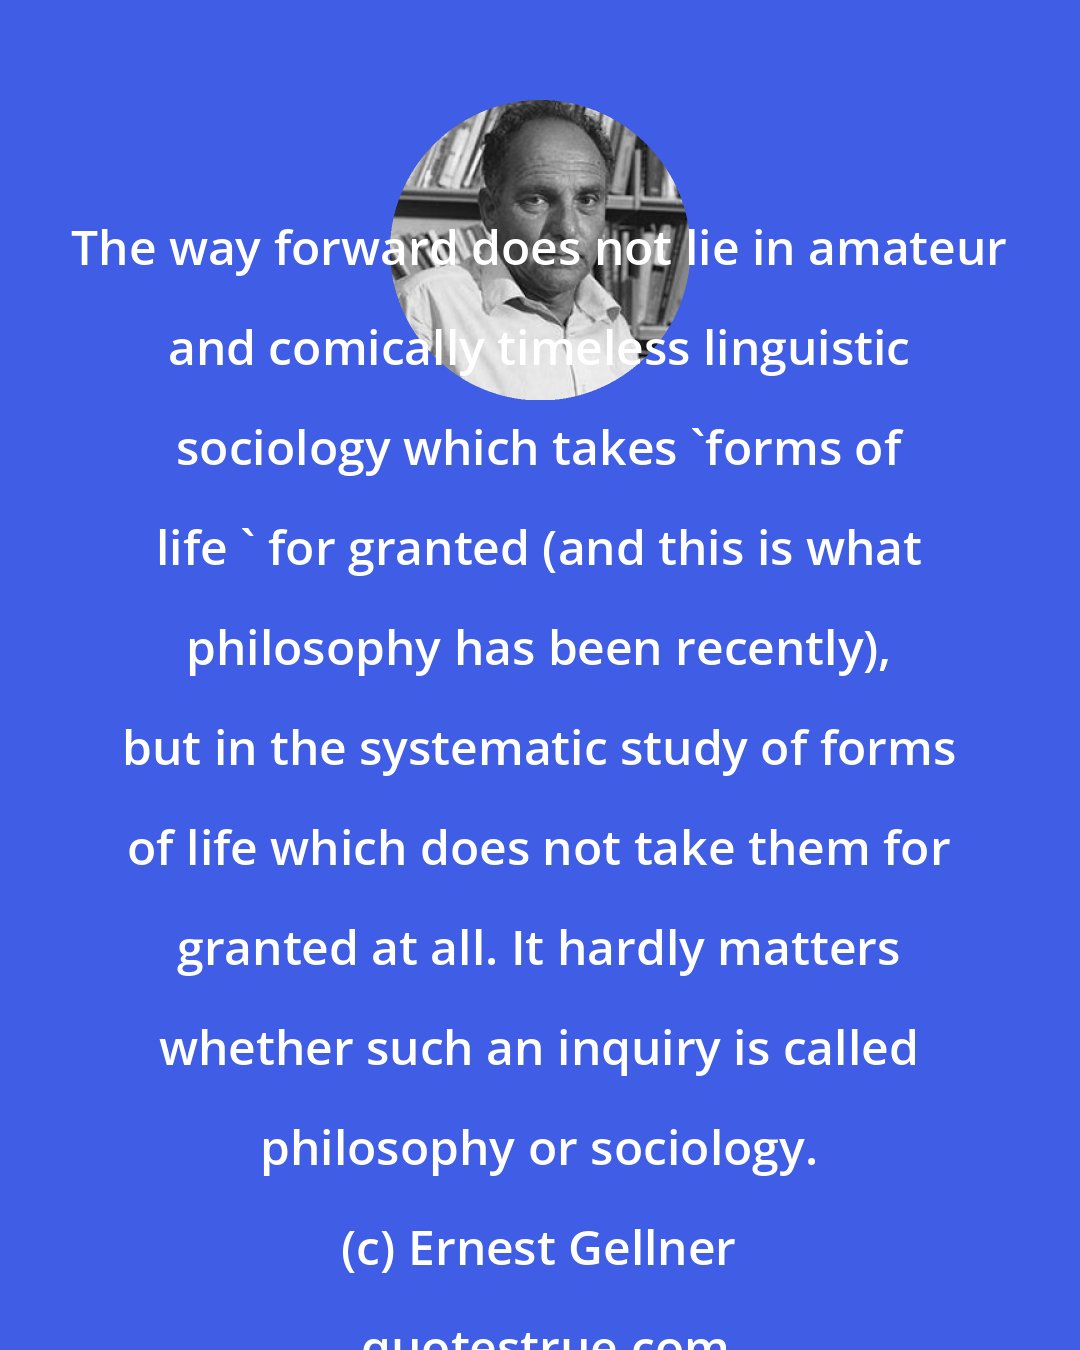 Ernest Gellner: The way forward does not lie in amateur and comically timeless linguistic sociology which takes 'forms of life ' for granted (and this is what philosophy has been recently), but in the systematic study of forms of life which does not take them for granted at all. It hardly matters whether such an inquiry is called philosophy or sociology.